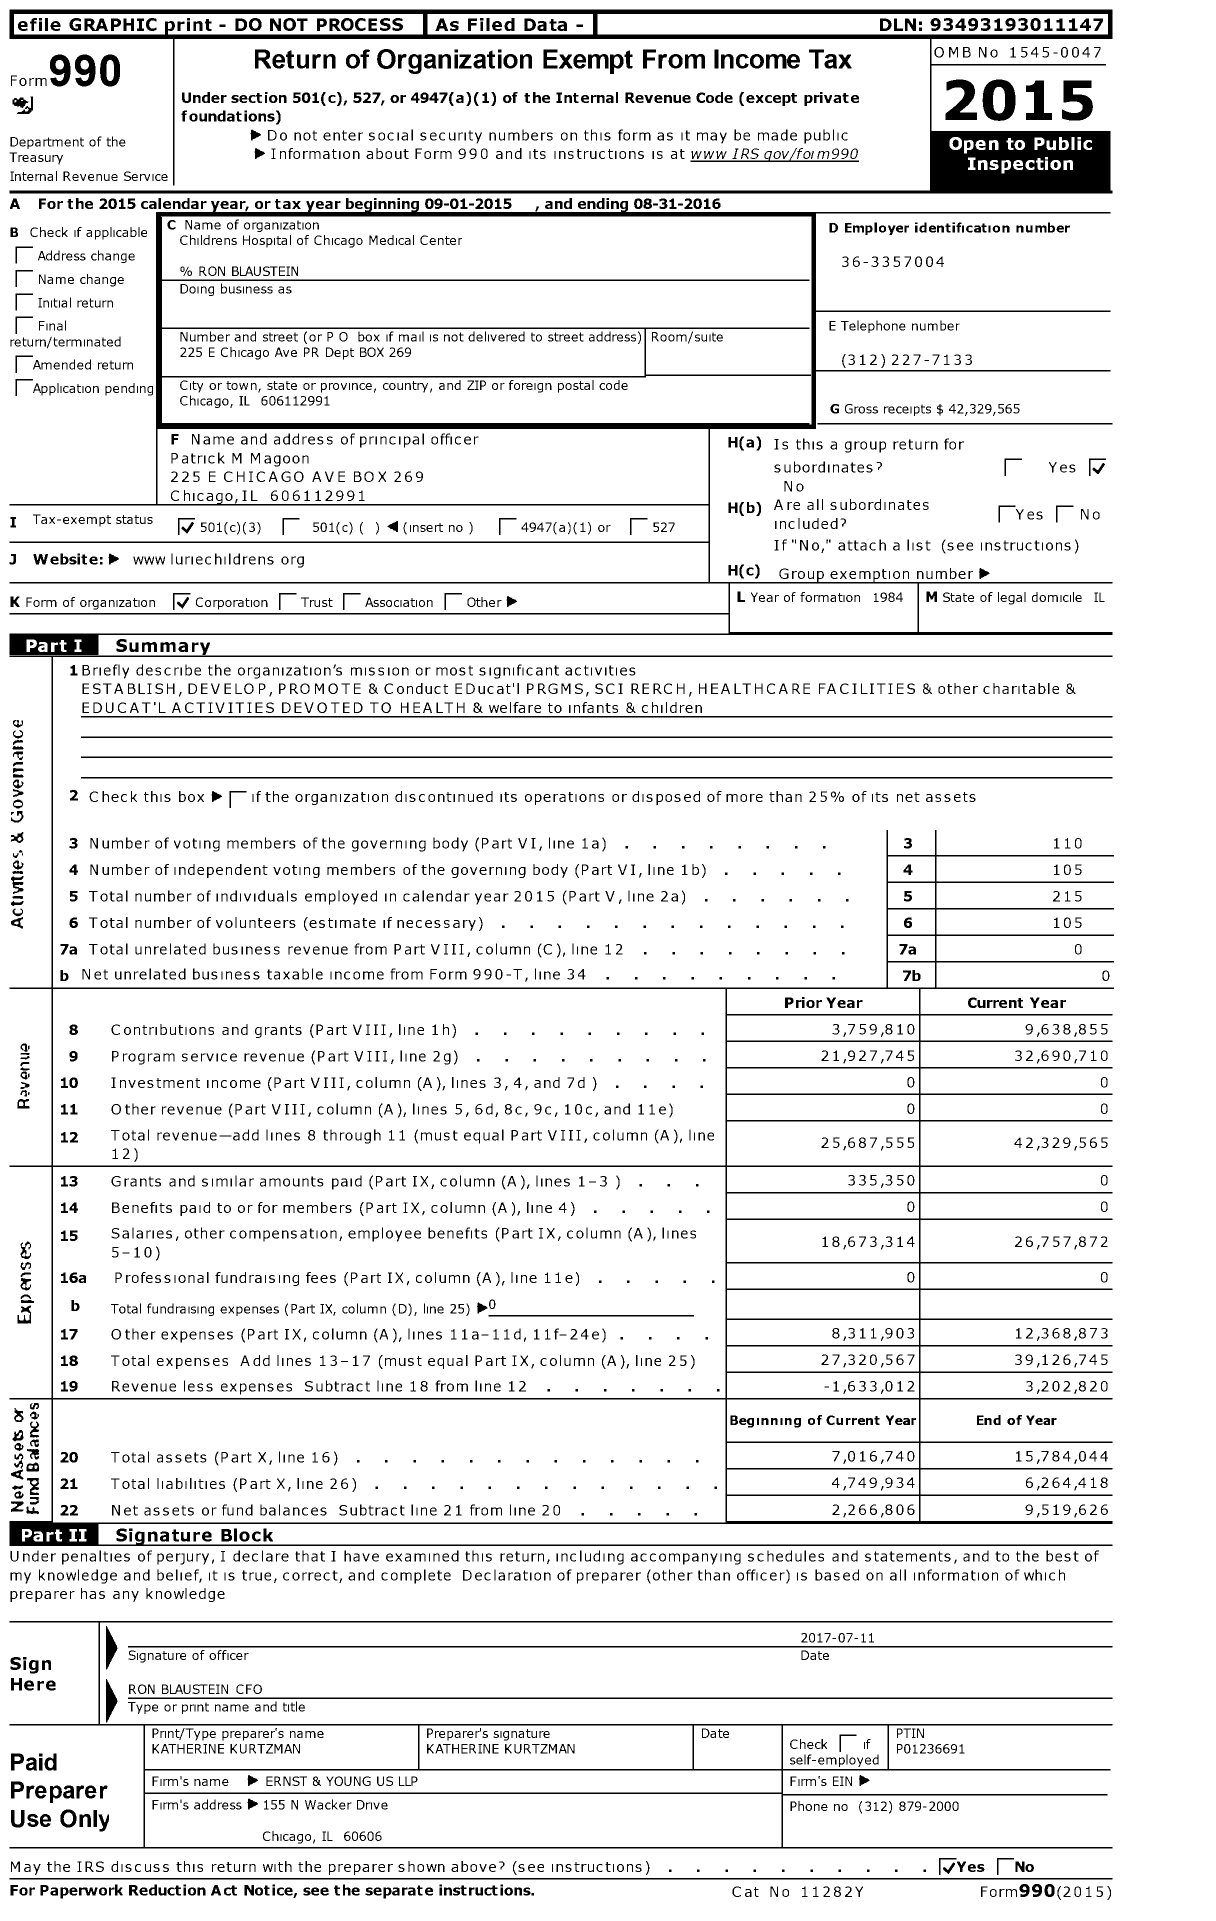 Image of first page of 2015 Form 990 for Children's Hospital of Chicago Medical Center